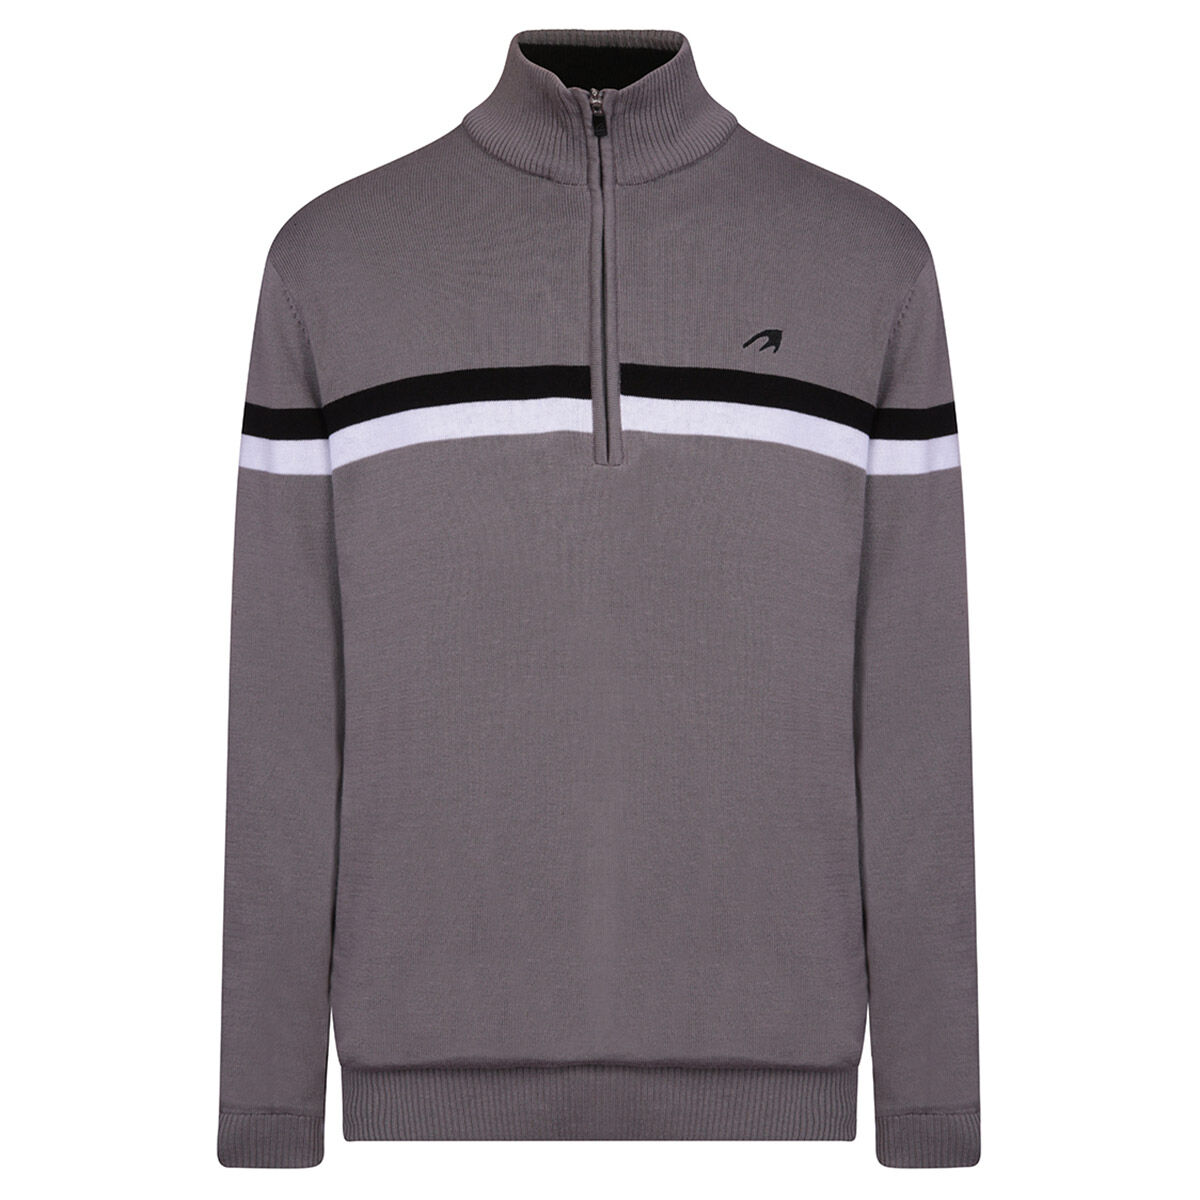 Benross Mens Grey And Black Knitted Lined Golf Midlayer, Size: Small | American Golf